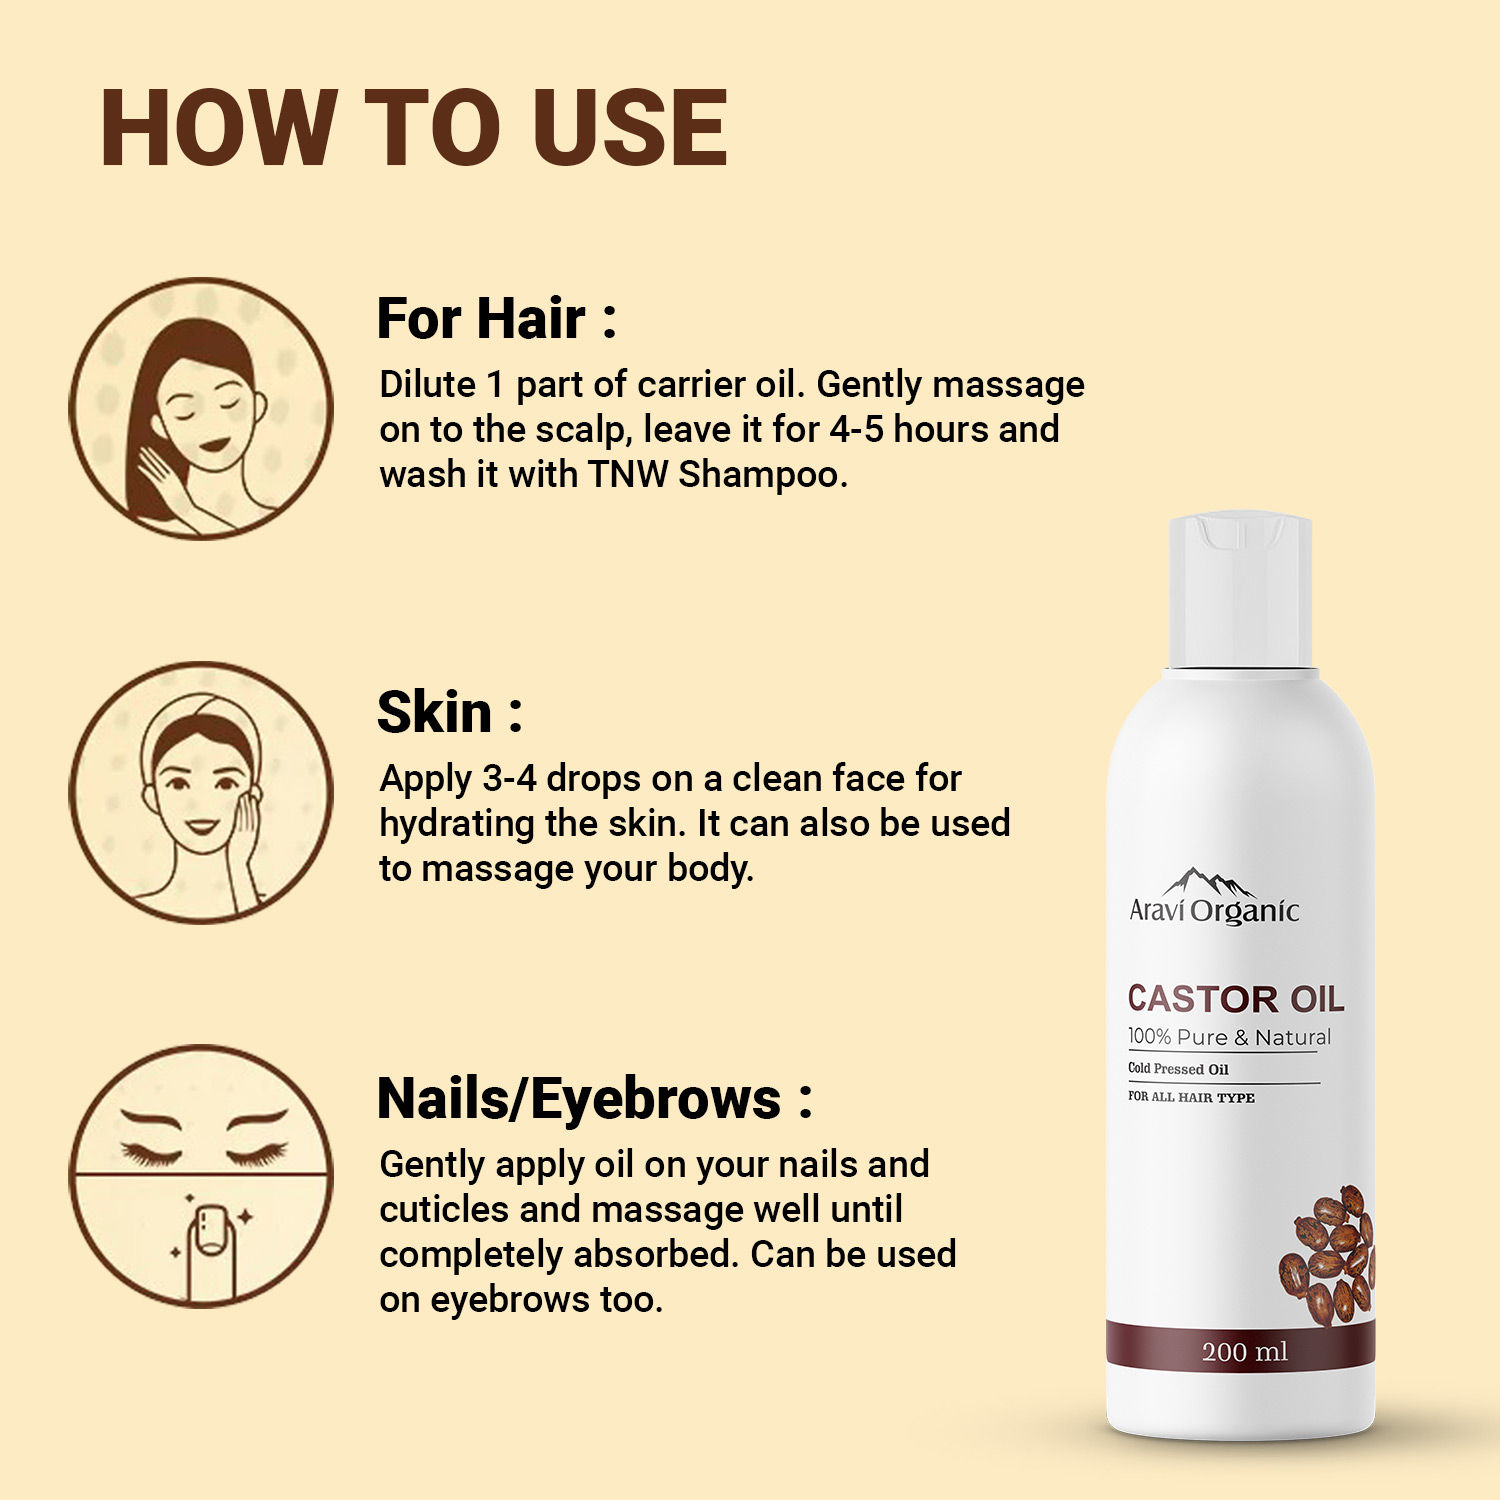 How to Use Castor Oil for Long, Luscious Hair